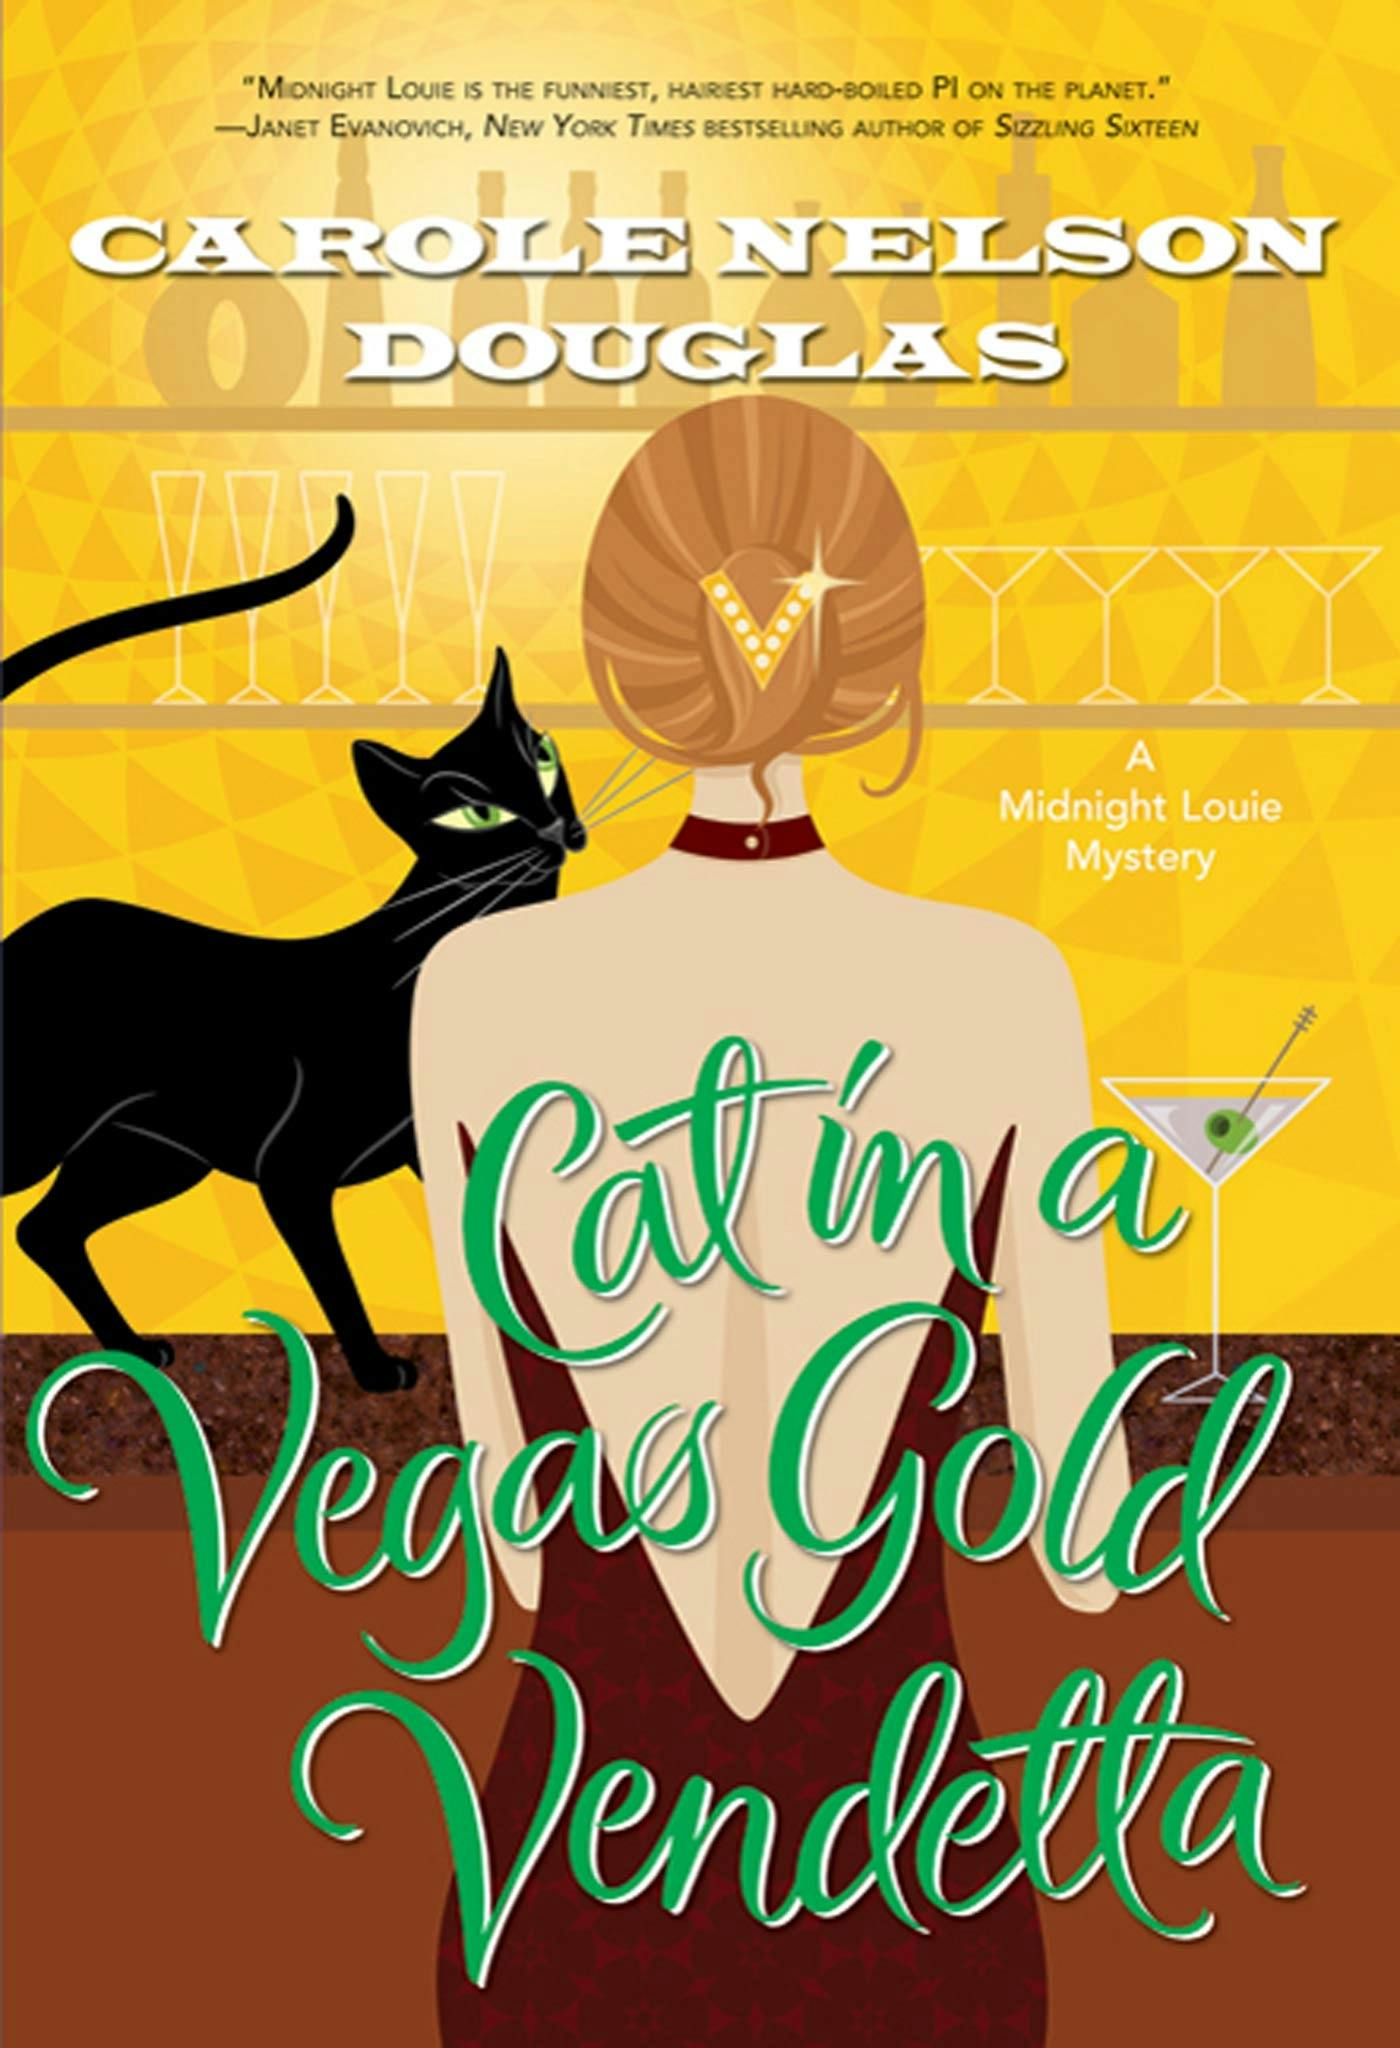 Cover for the book titled as: Cat in a Vegas Gold Vendetta